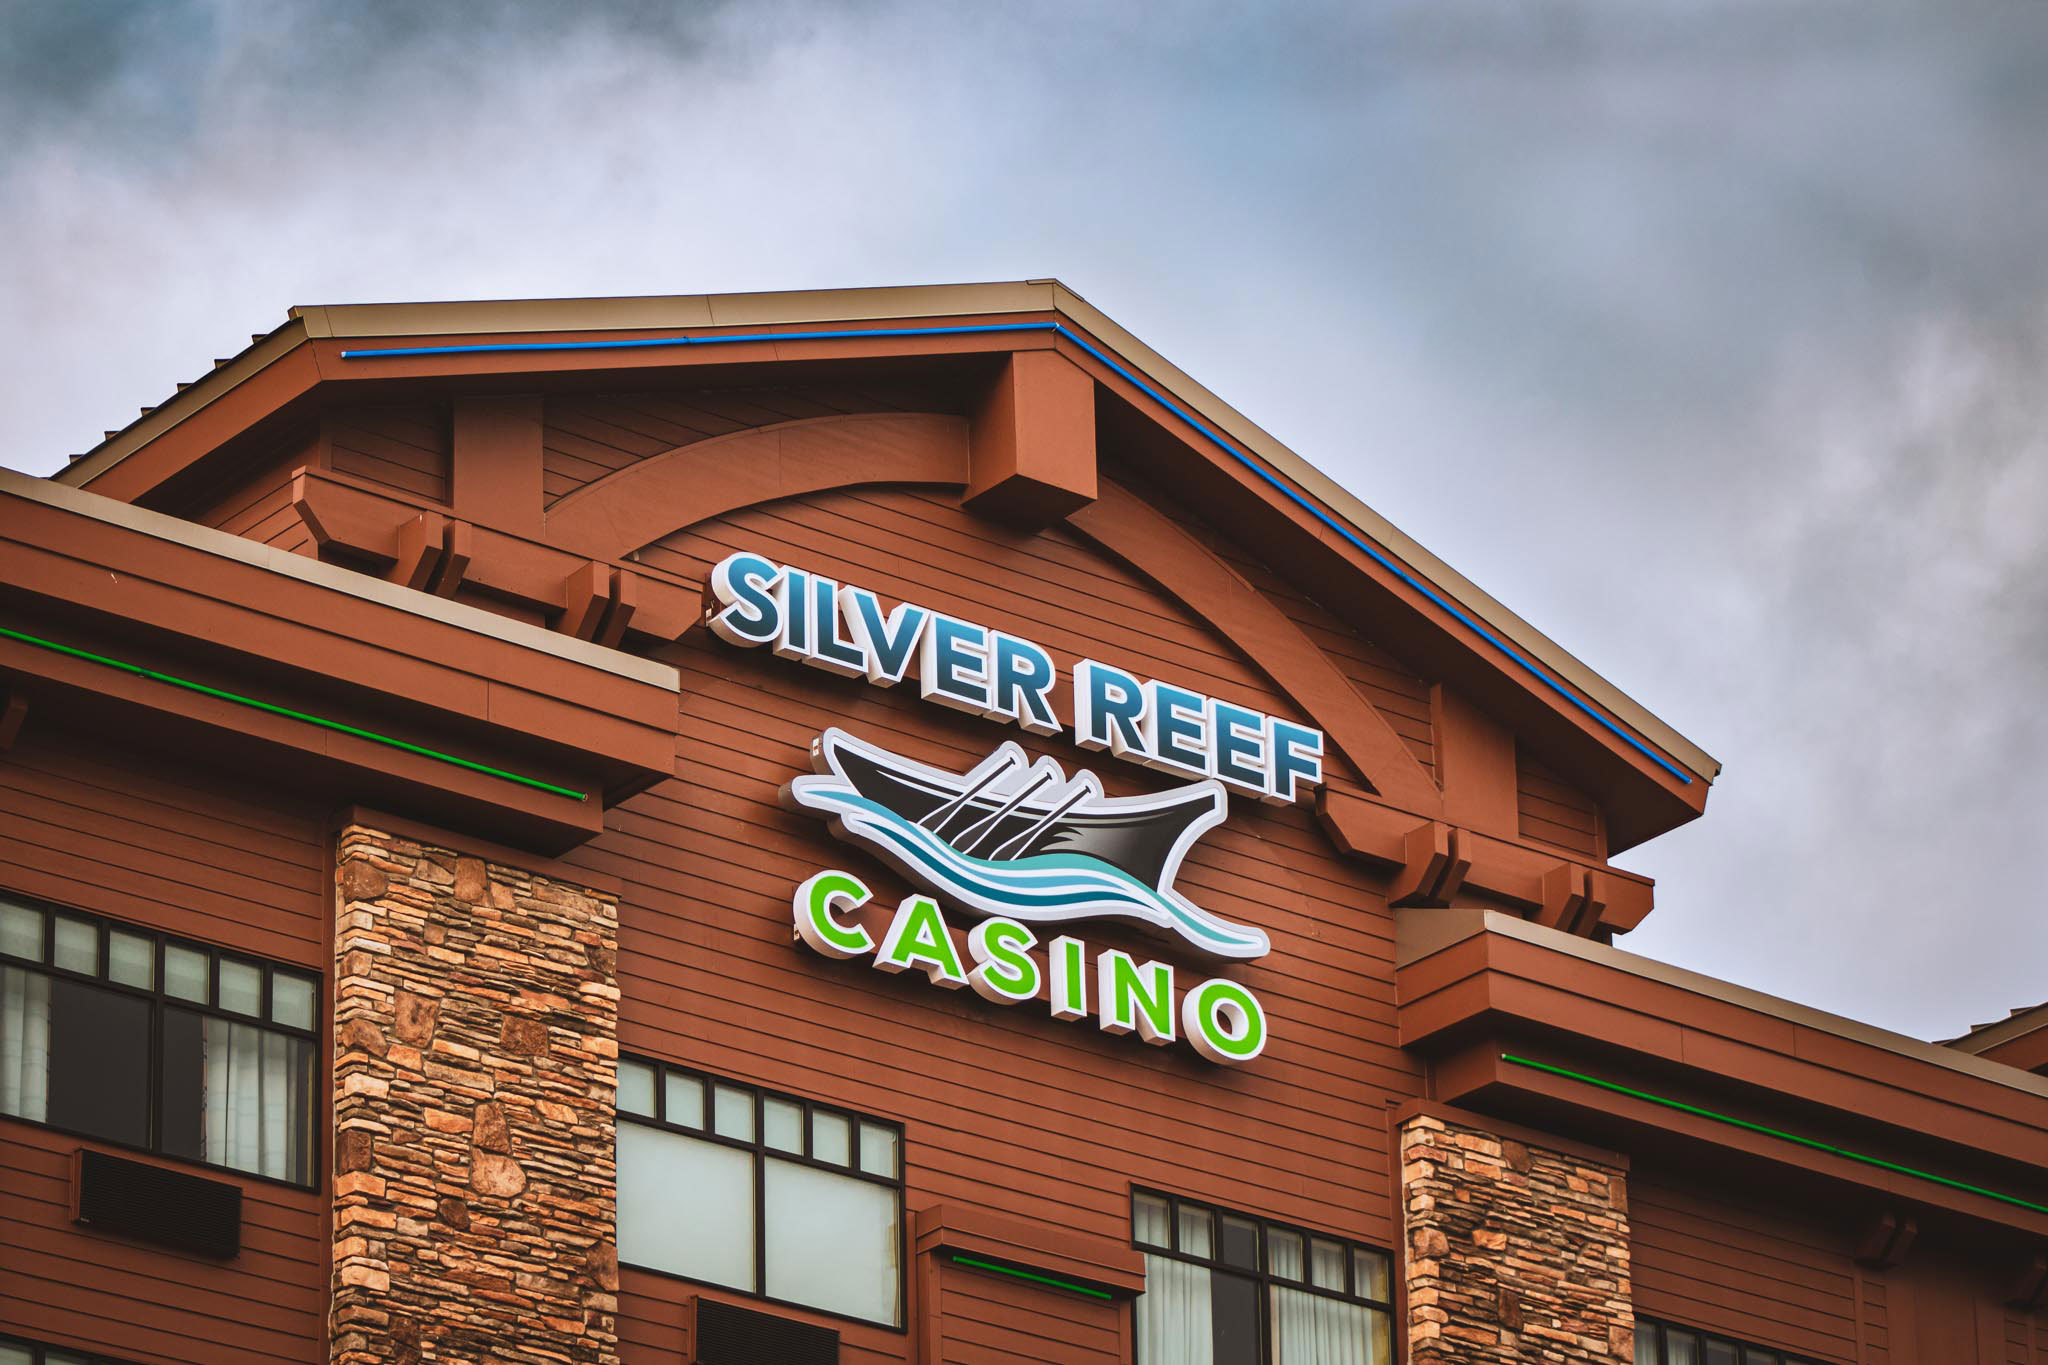 Silver Reef Casino 70 feet high building sign